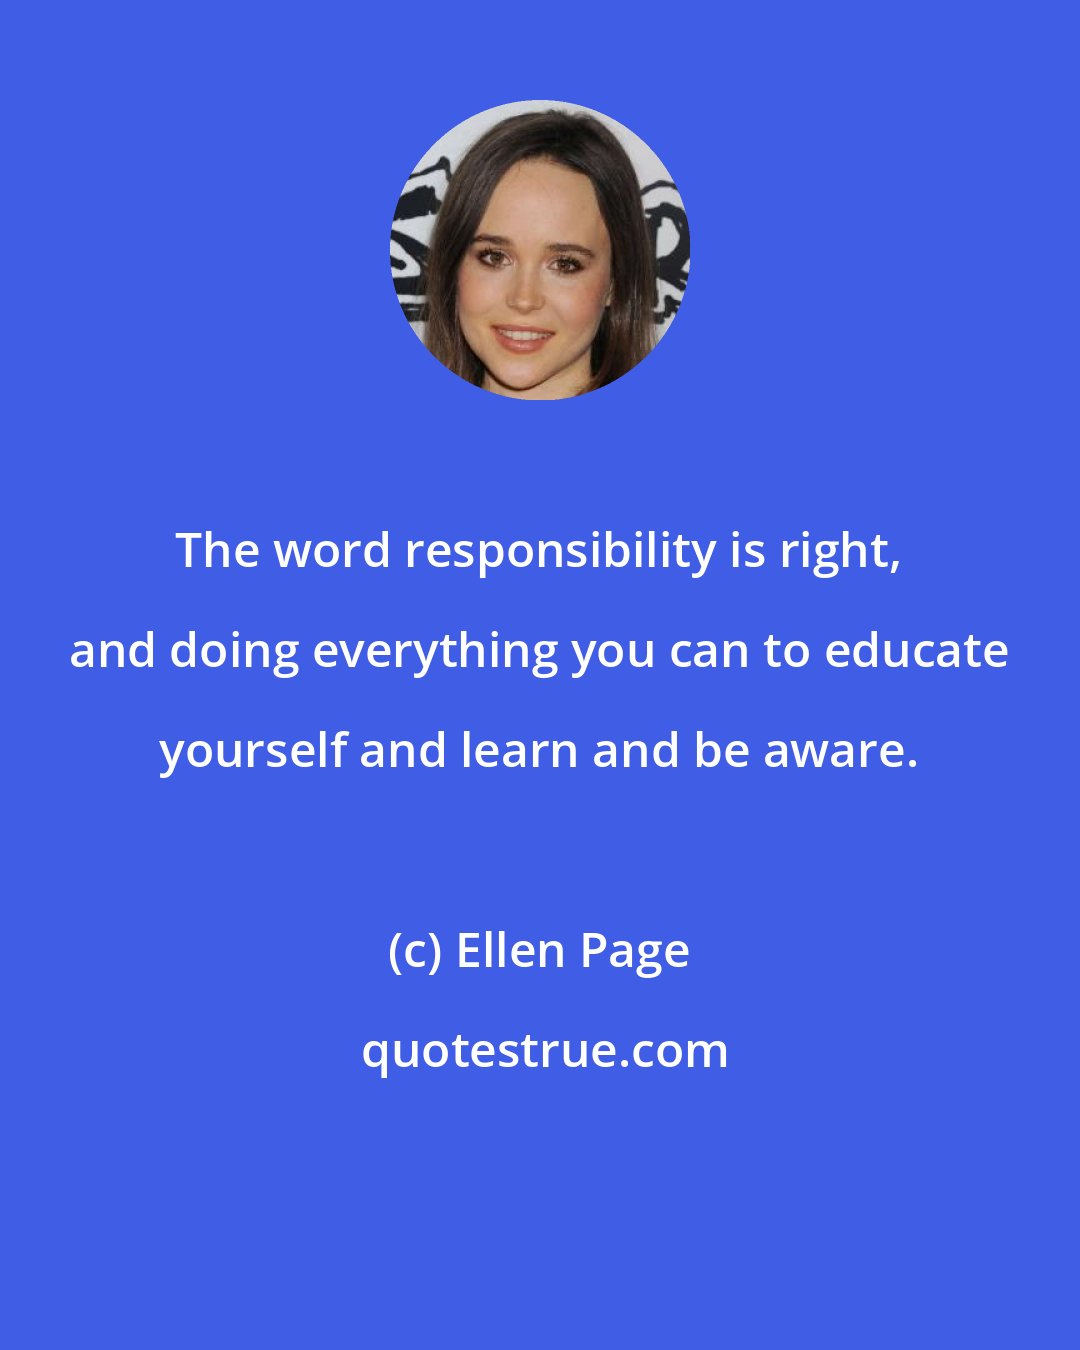 Ellen Page: The word responsibility is right, and doing everything you can to educate yourself and learn and be aware.